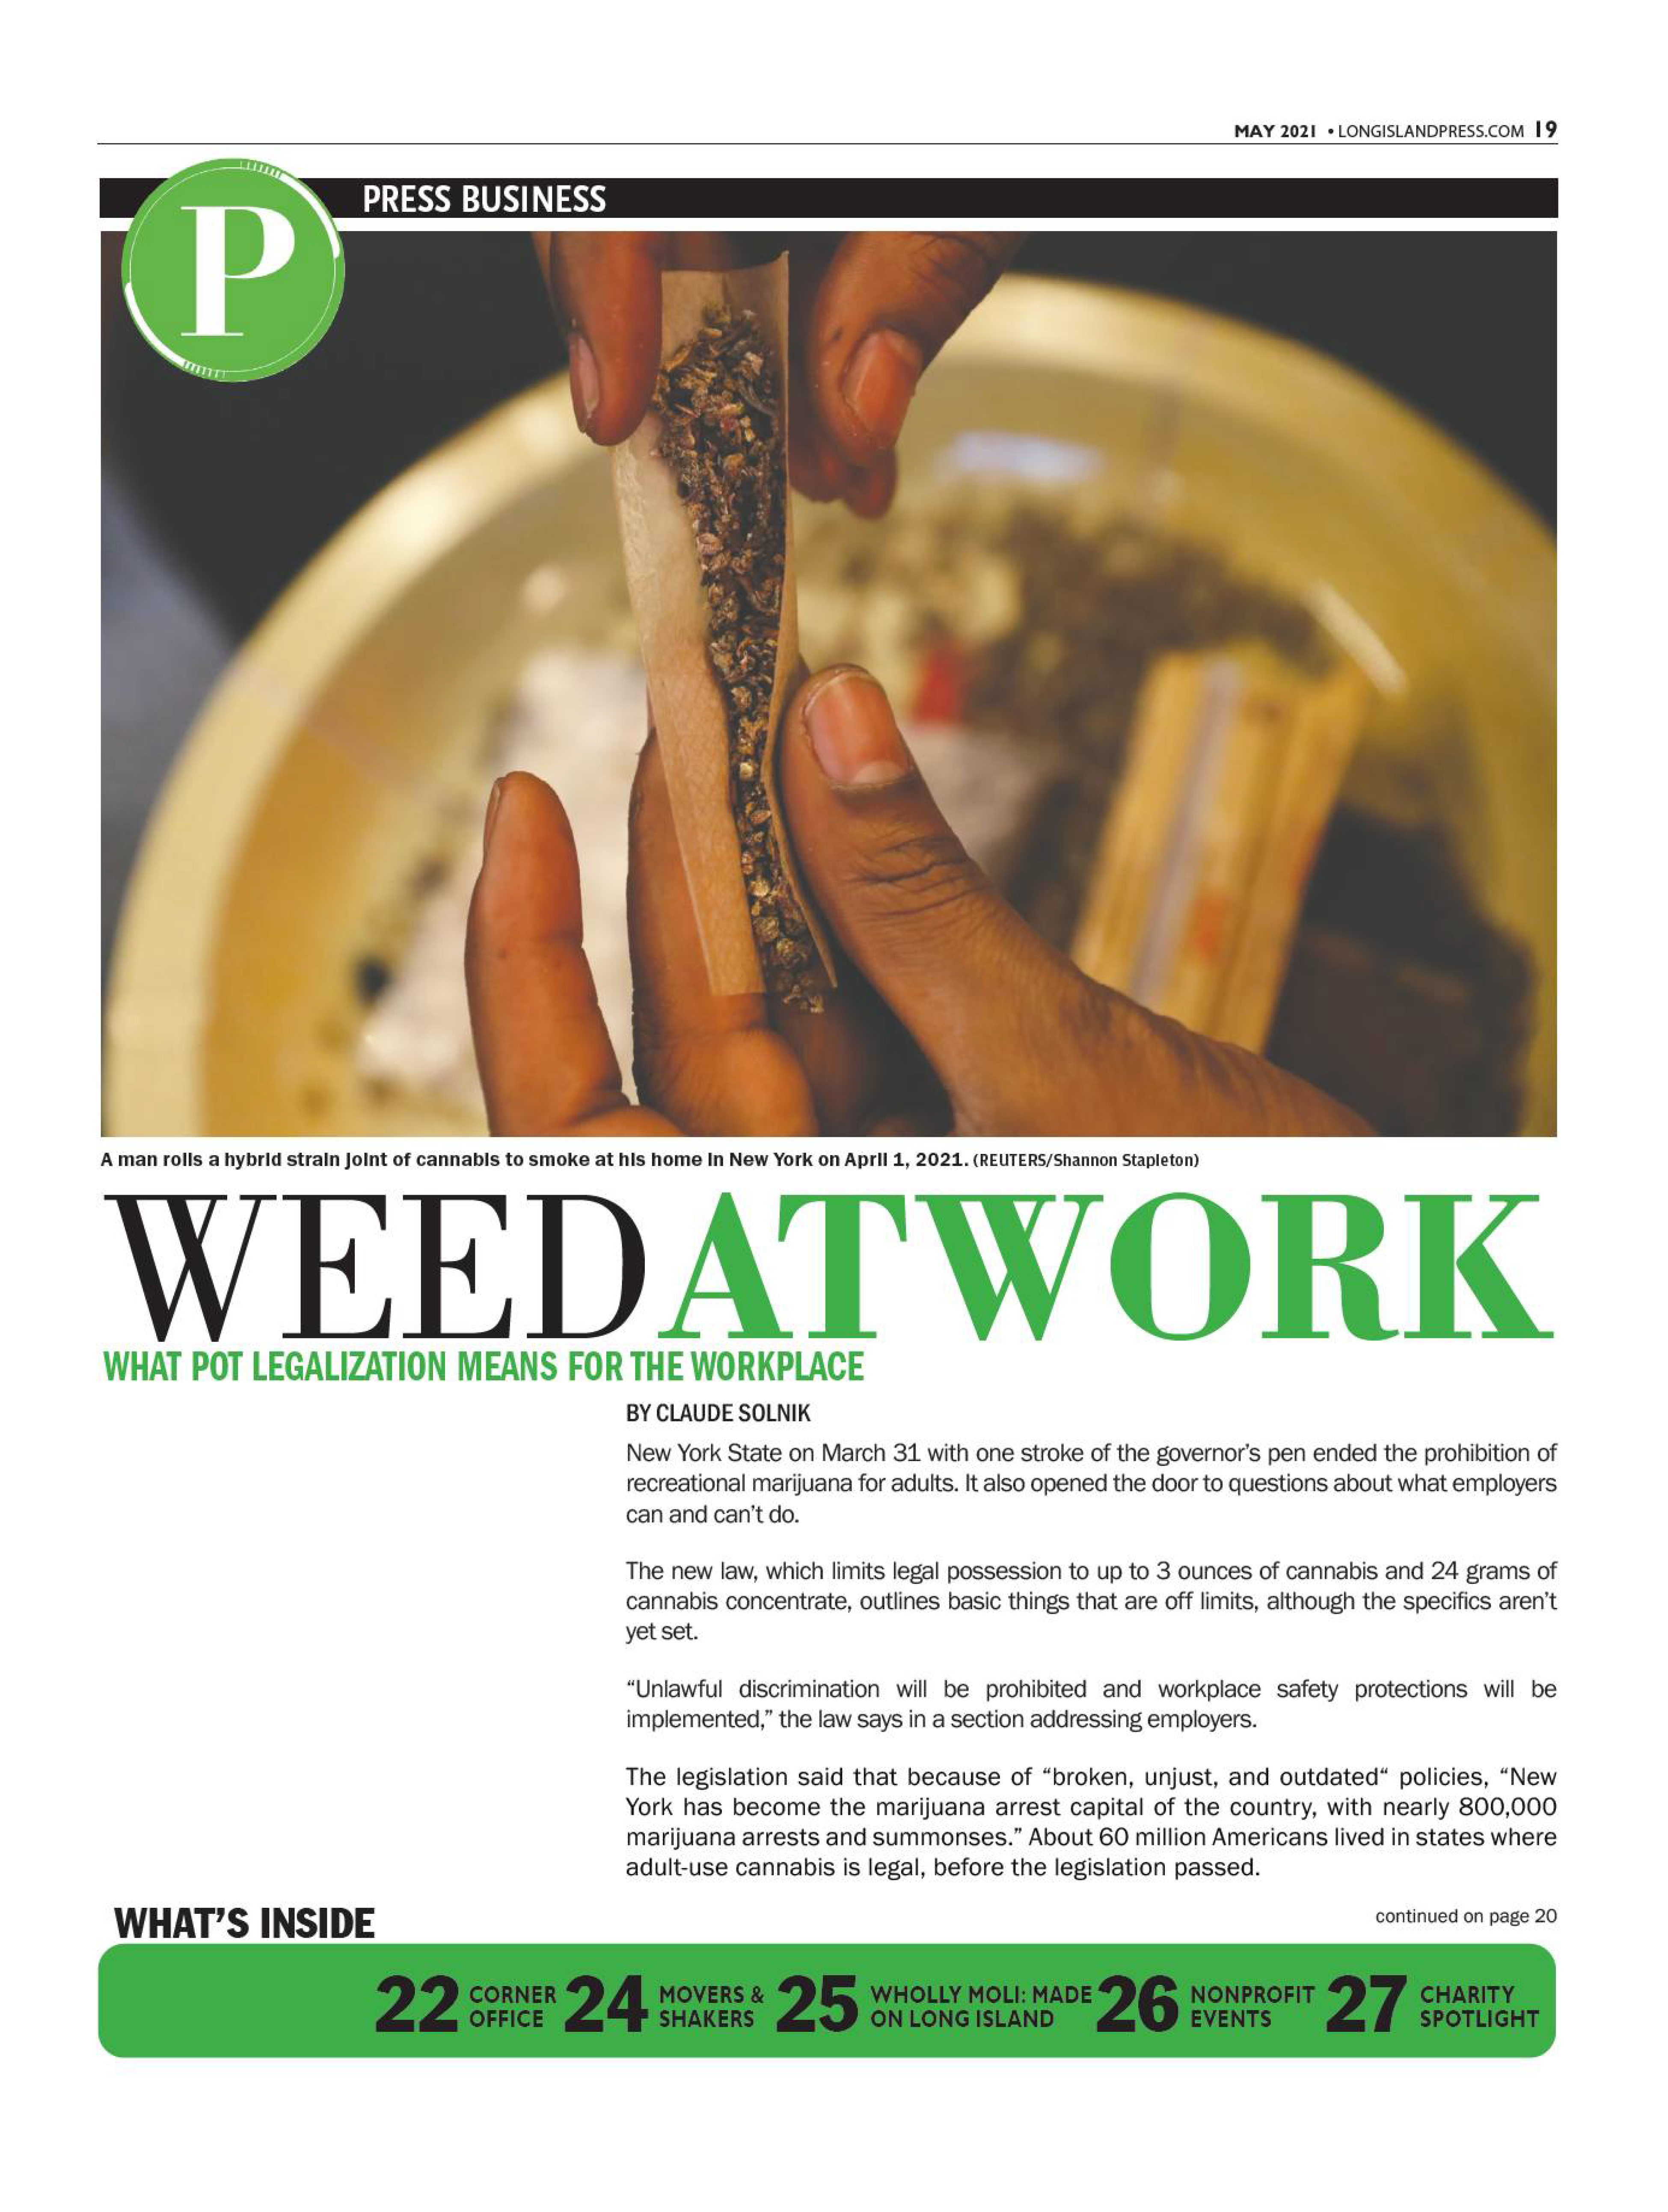 Weed at Work Article